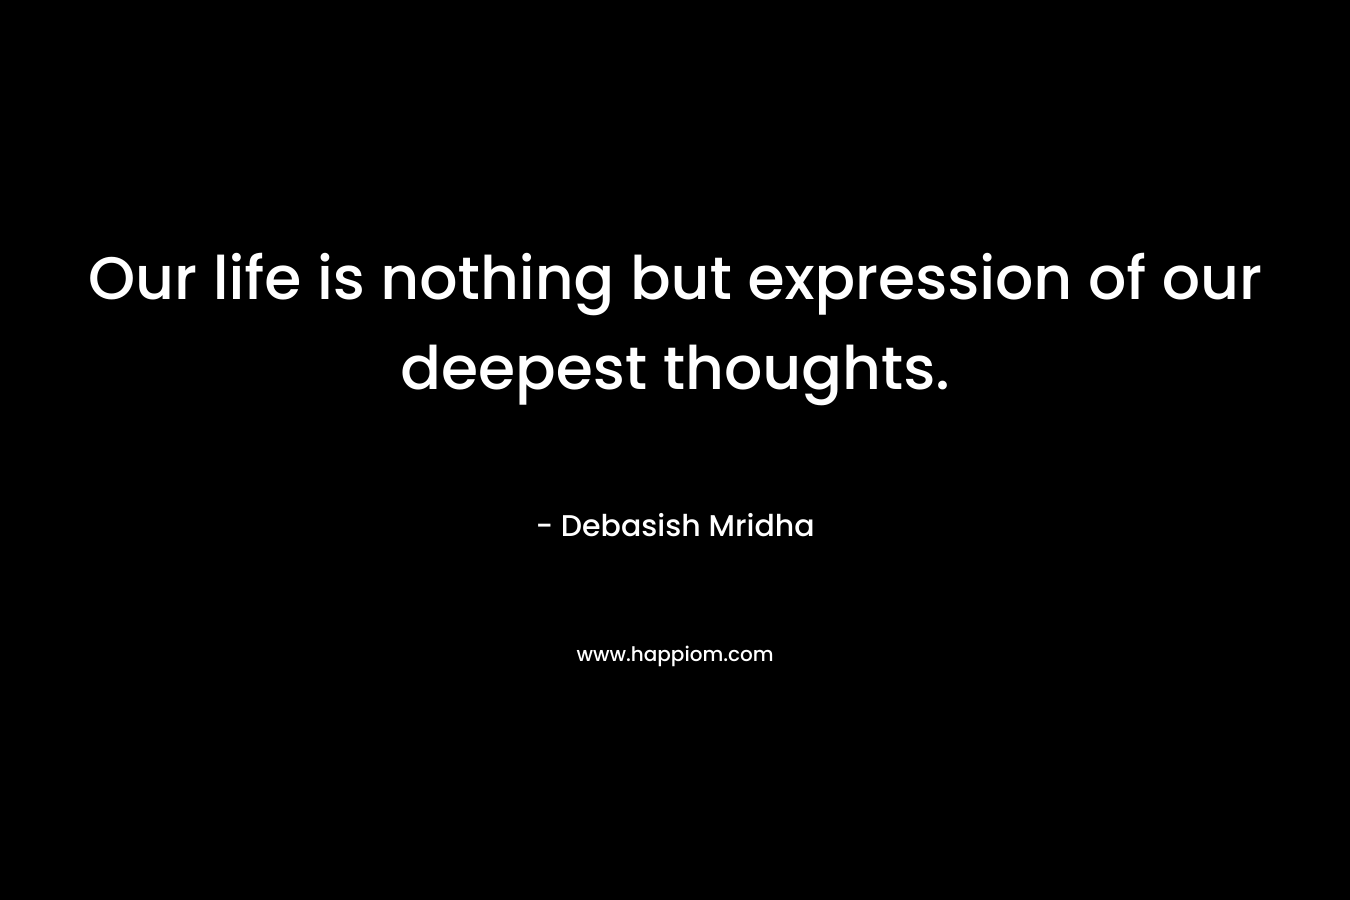 Our life is nothing but expression of our deepest thoughts.